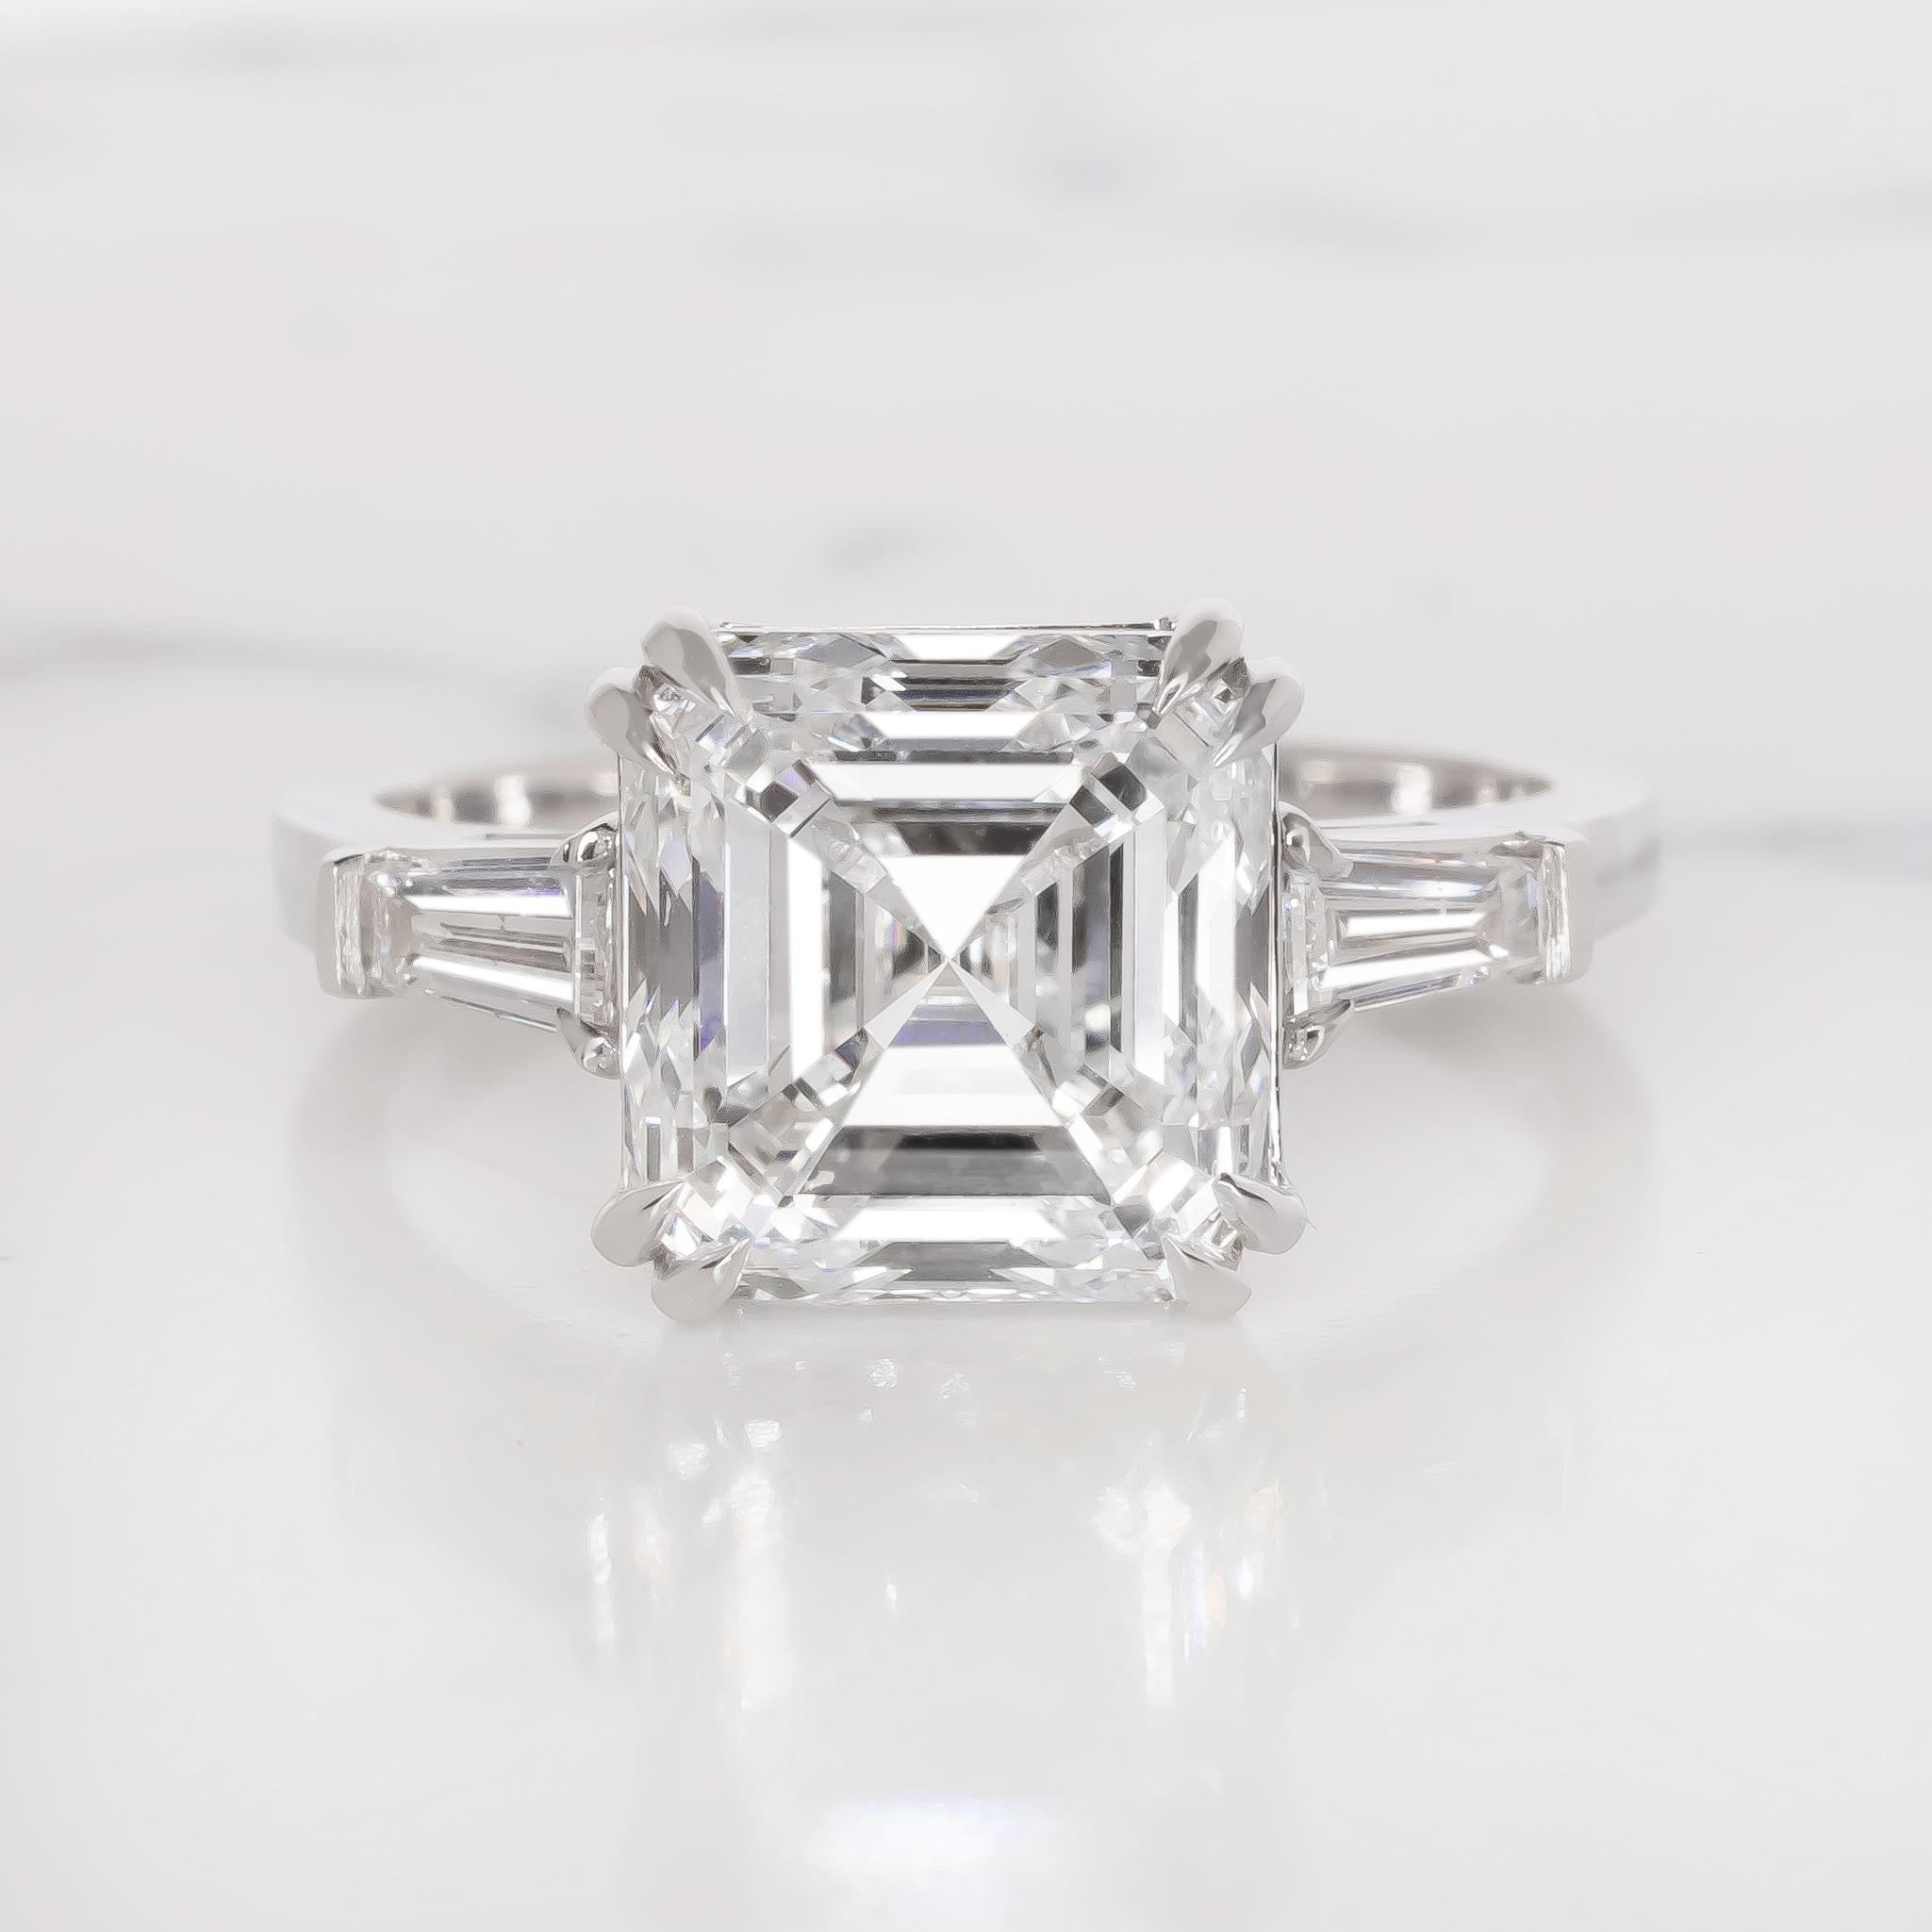 GIA Certified 5 Carat Asscher Cut Diamond Platinum Ring 
I Color
VS2 Clarity
Excellent Polish
Veri Good Symmetry 
None Fluorescence
Diamond from Botswana!
Tapered baguettes diamonds side stones.

Setting made in solid platinum
